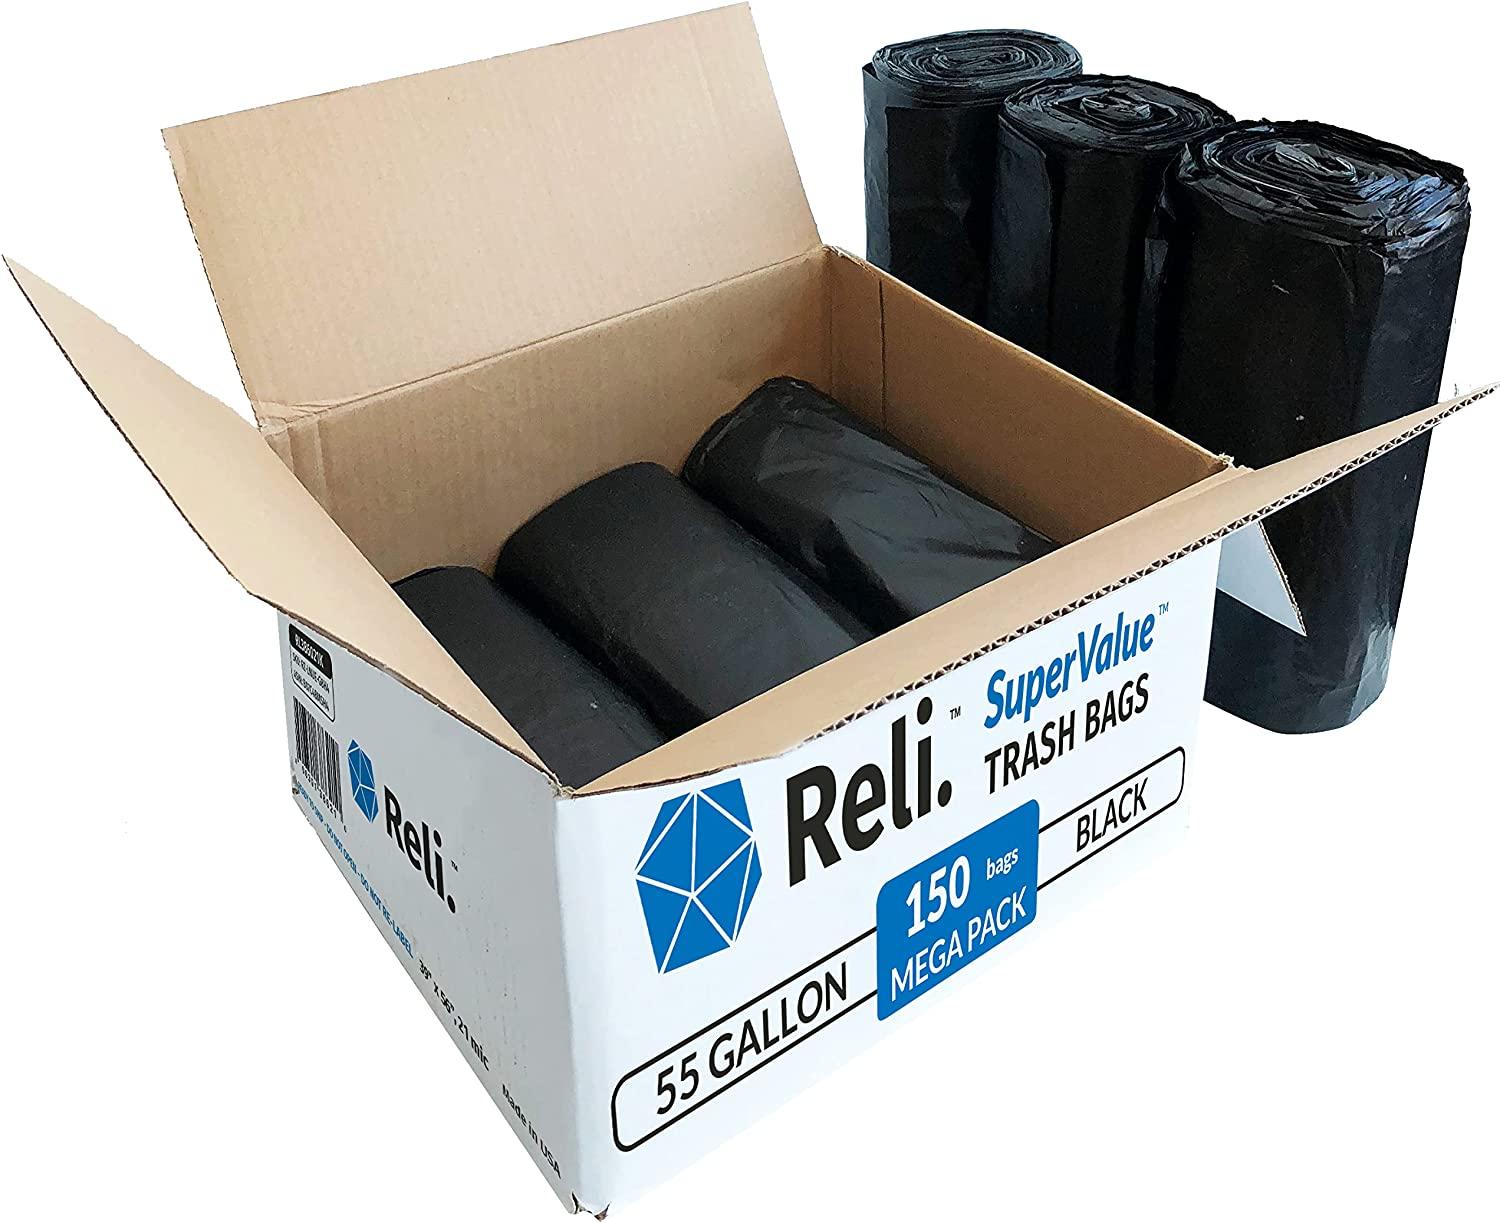 Resilia Tall 15 Gallon Trash Bags - Black 100 Bags/Roll, 1 Mil Thick, 24x33  inches (WxH), Wire Ties Included, MADE IN USA